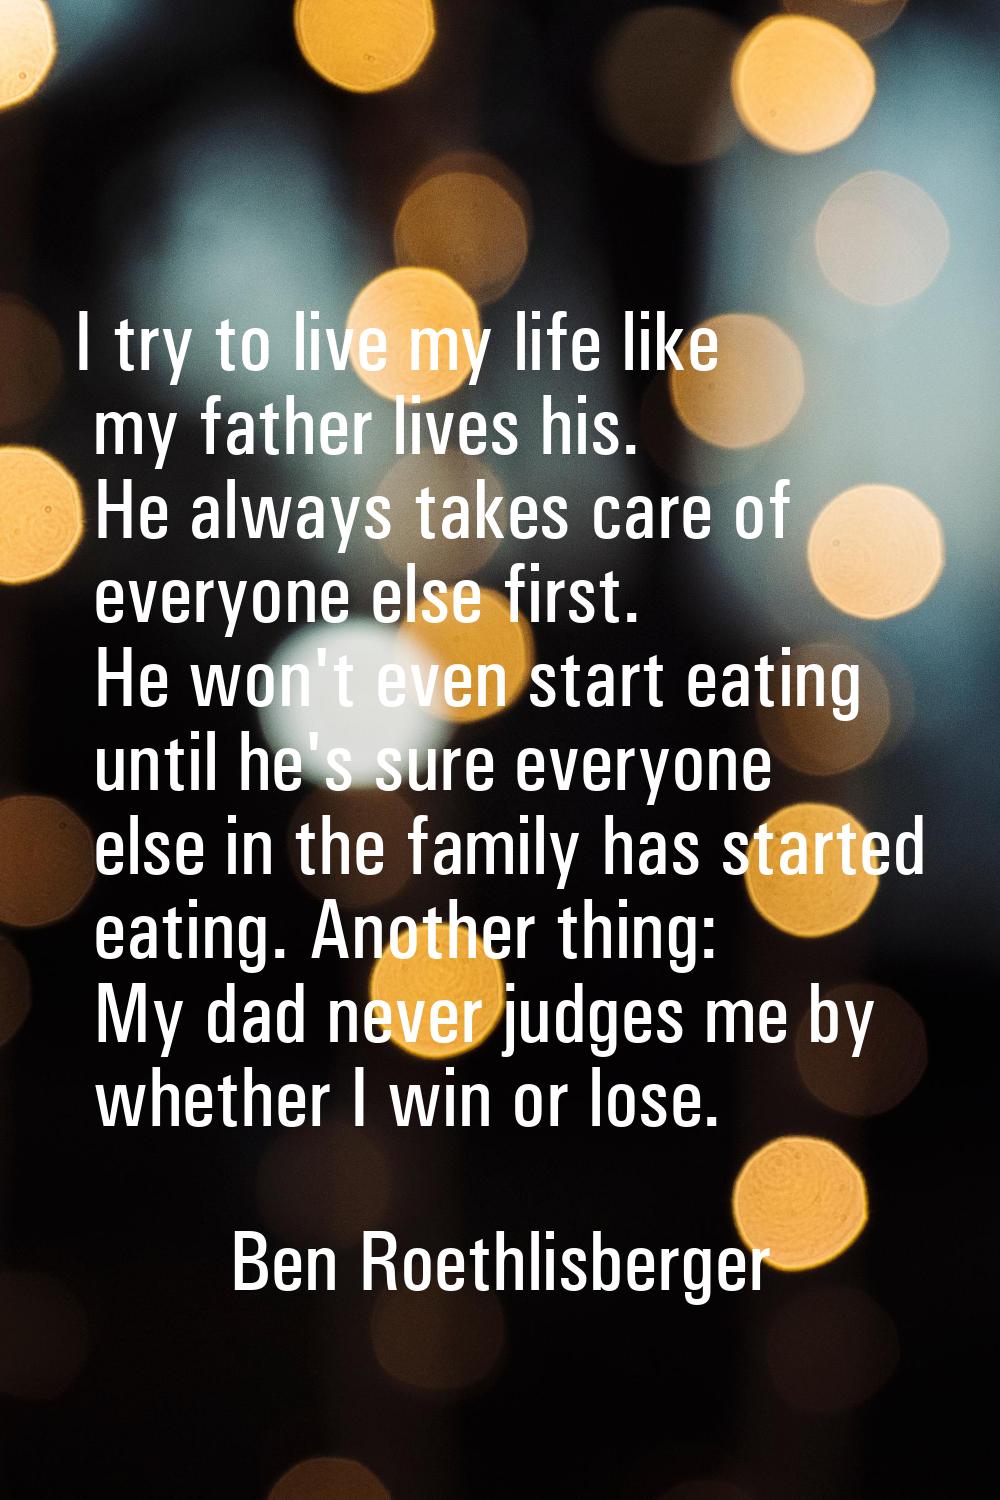 I try to live my life like my father lives his. He always takes care of everyone else first. He won